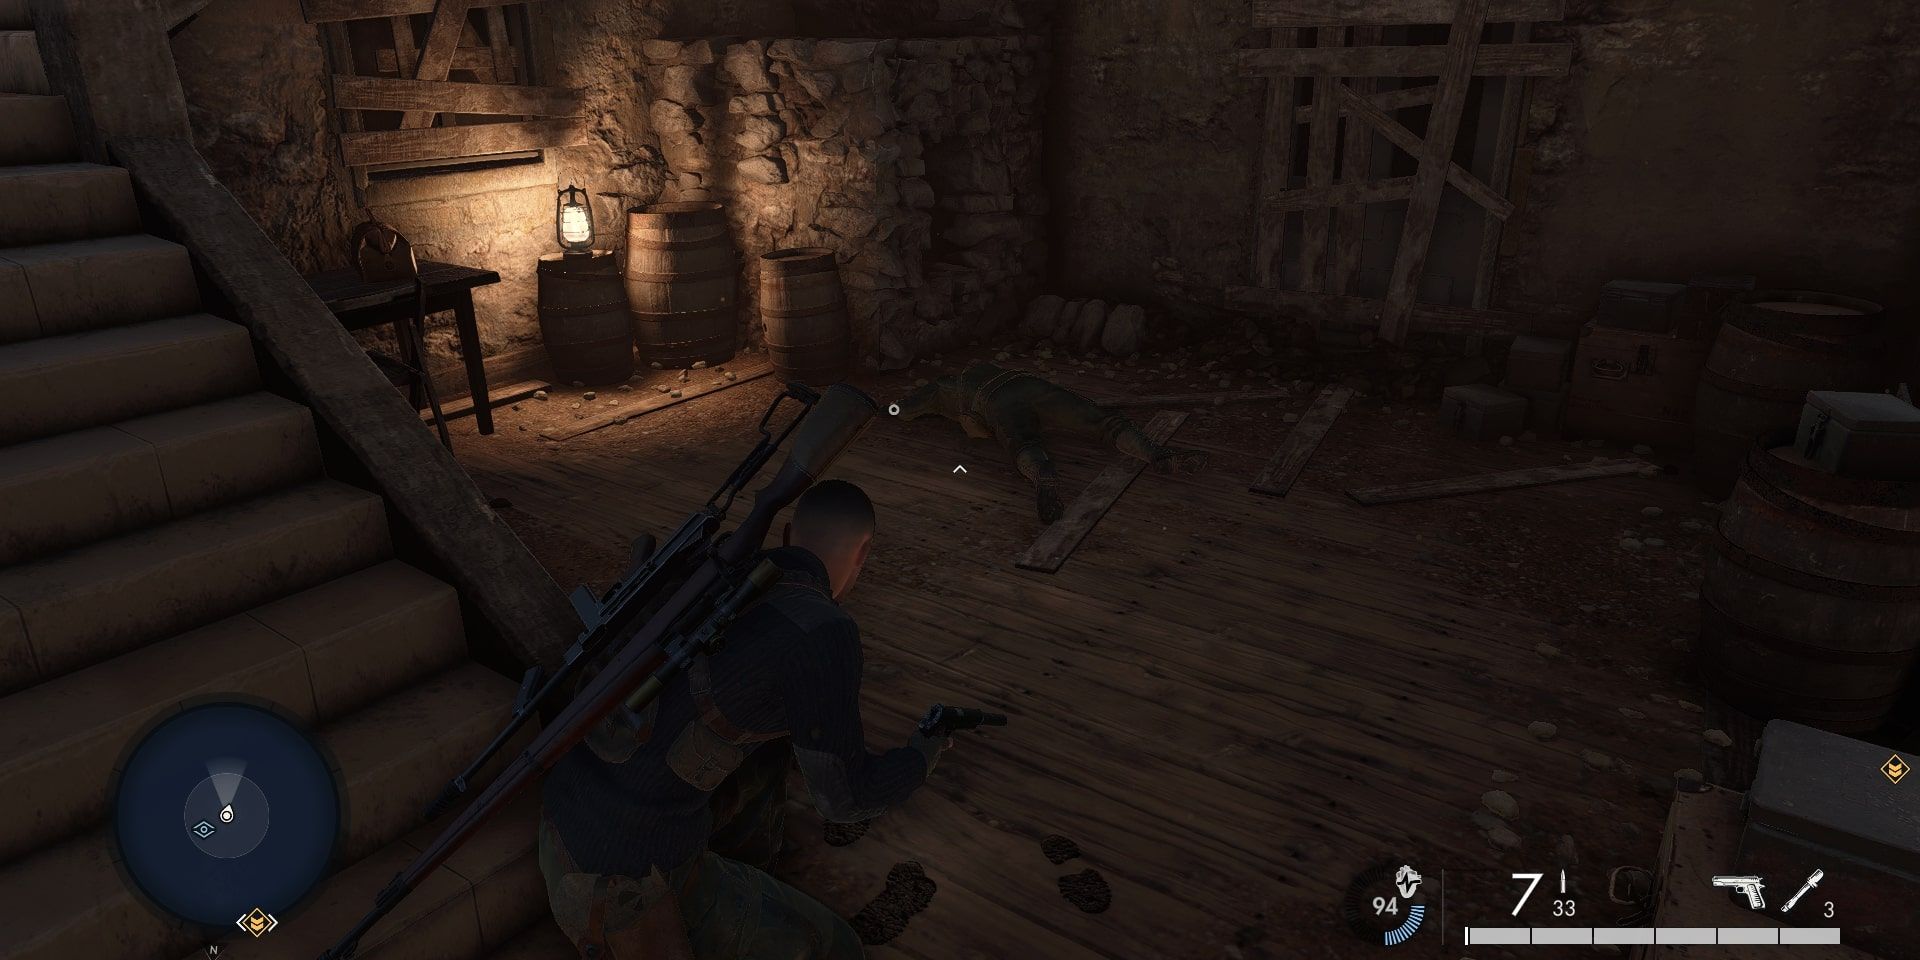 Sniper Elite 5 Secret Weapons Abandoned House showing a dead body on the lower floor